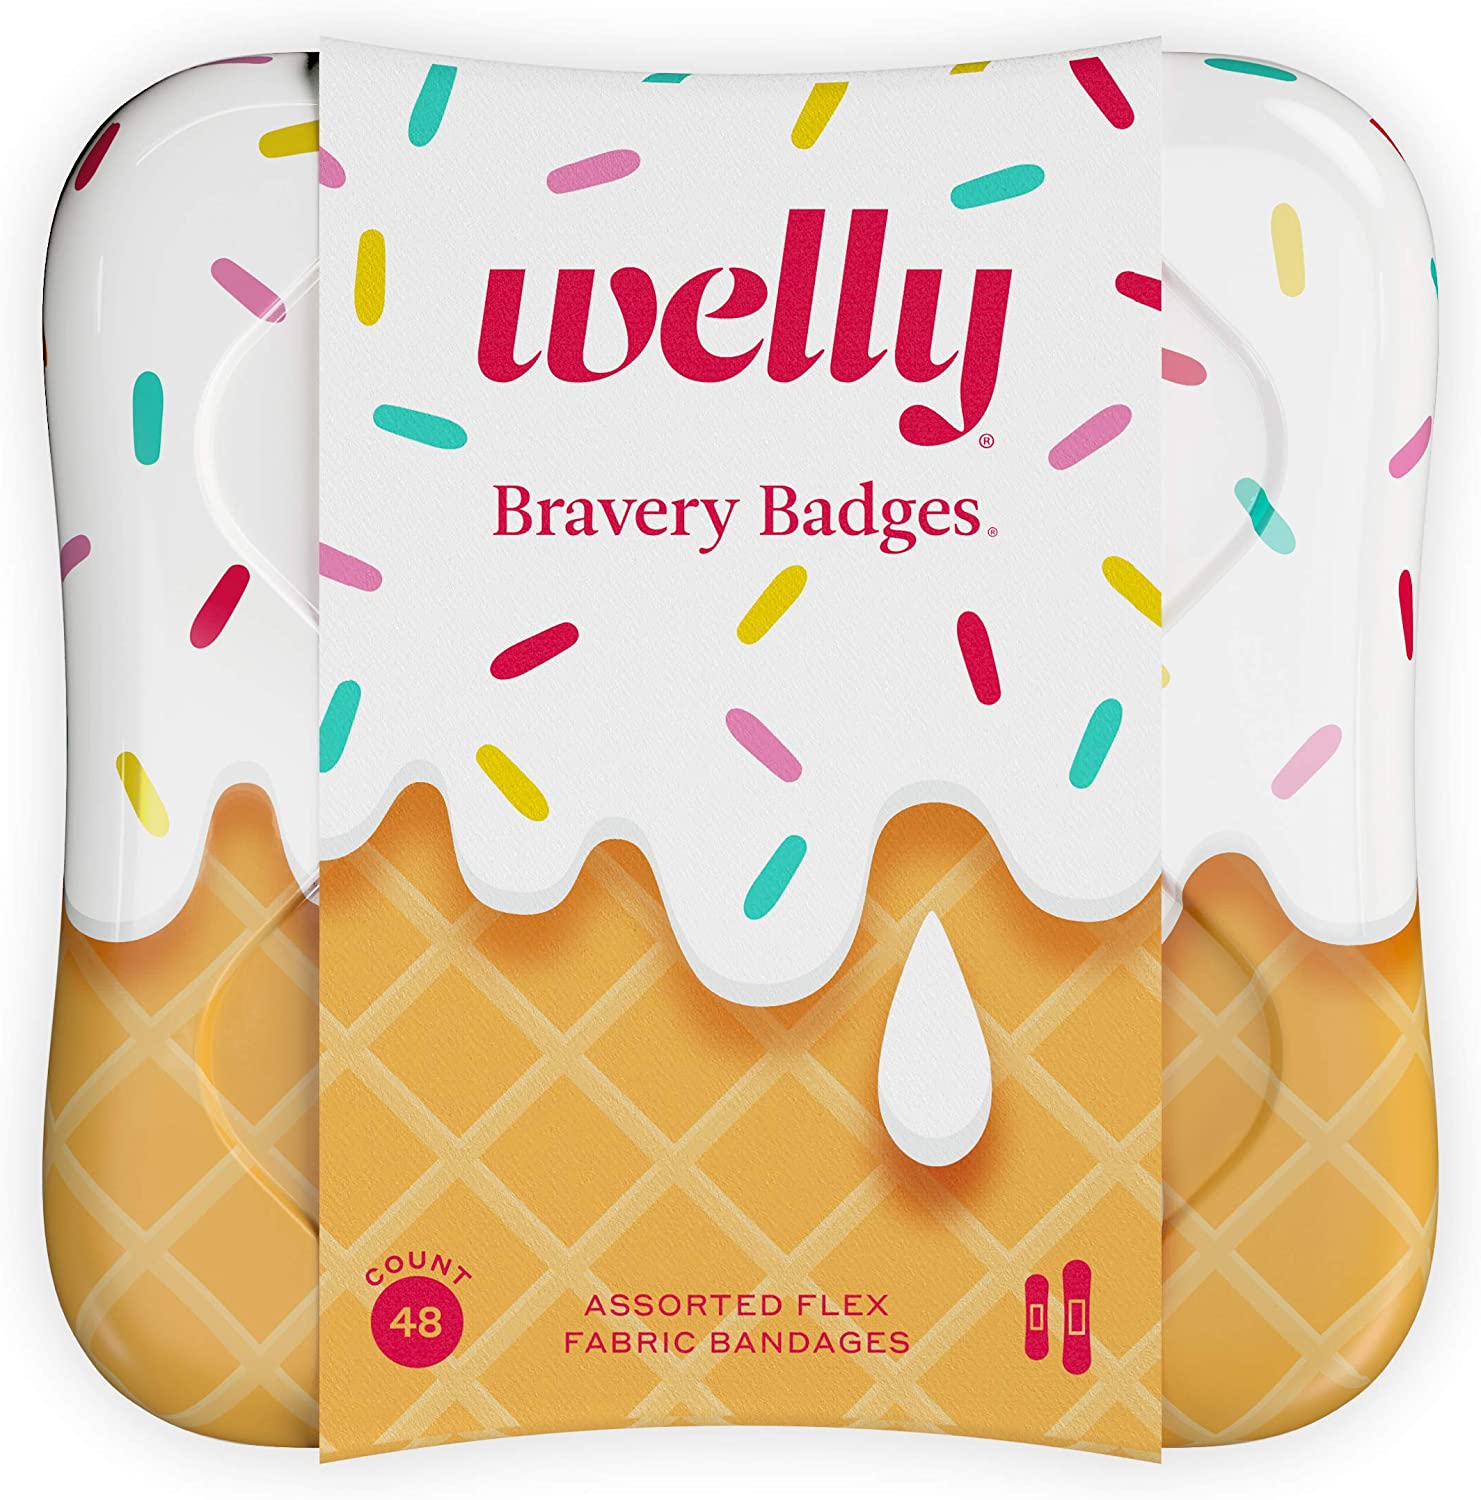 Welly Bandages | Adhesive Flexible Fabric Bravery Badges | Assorted Shapes for Minor Cuts, Scrapes, and Wounds |  Kids Stocking Stuffers